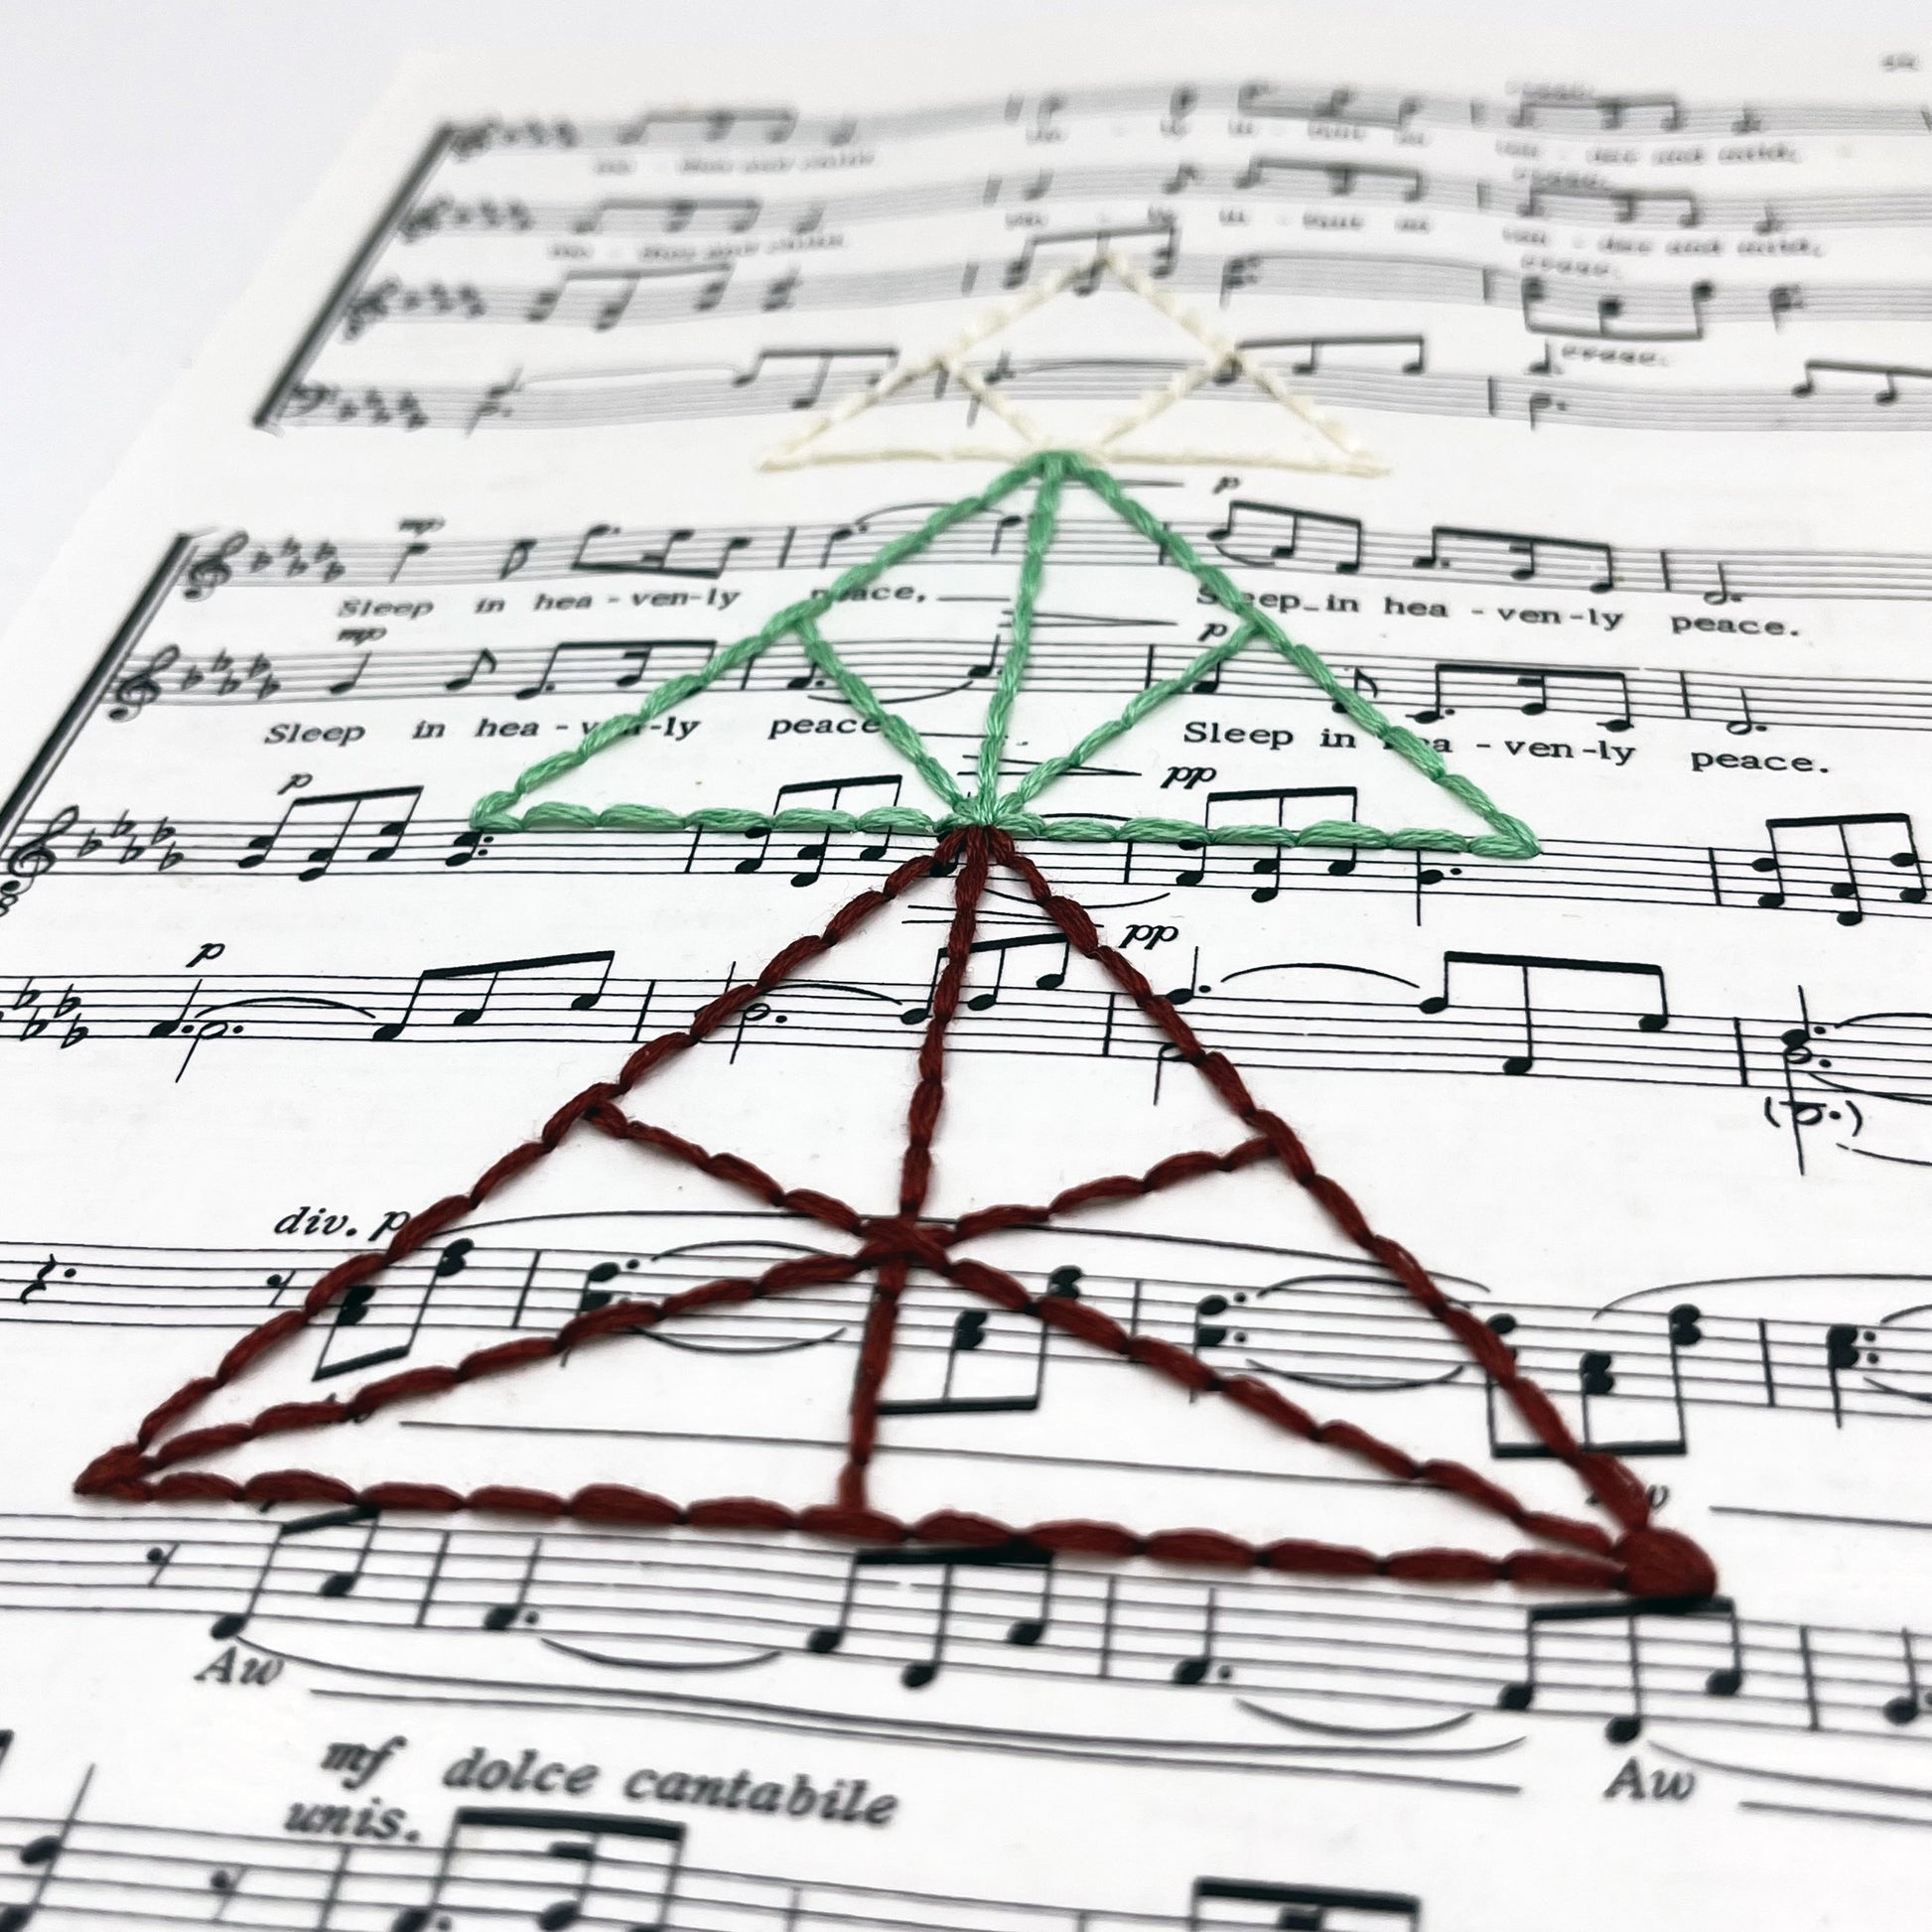 a close up angled view of sheet music from the Christmas song "Silent Night", hand stitched over with a Christmas tree made from triangles, in red, green and ivory thread